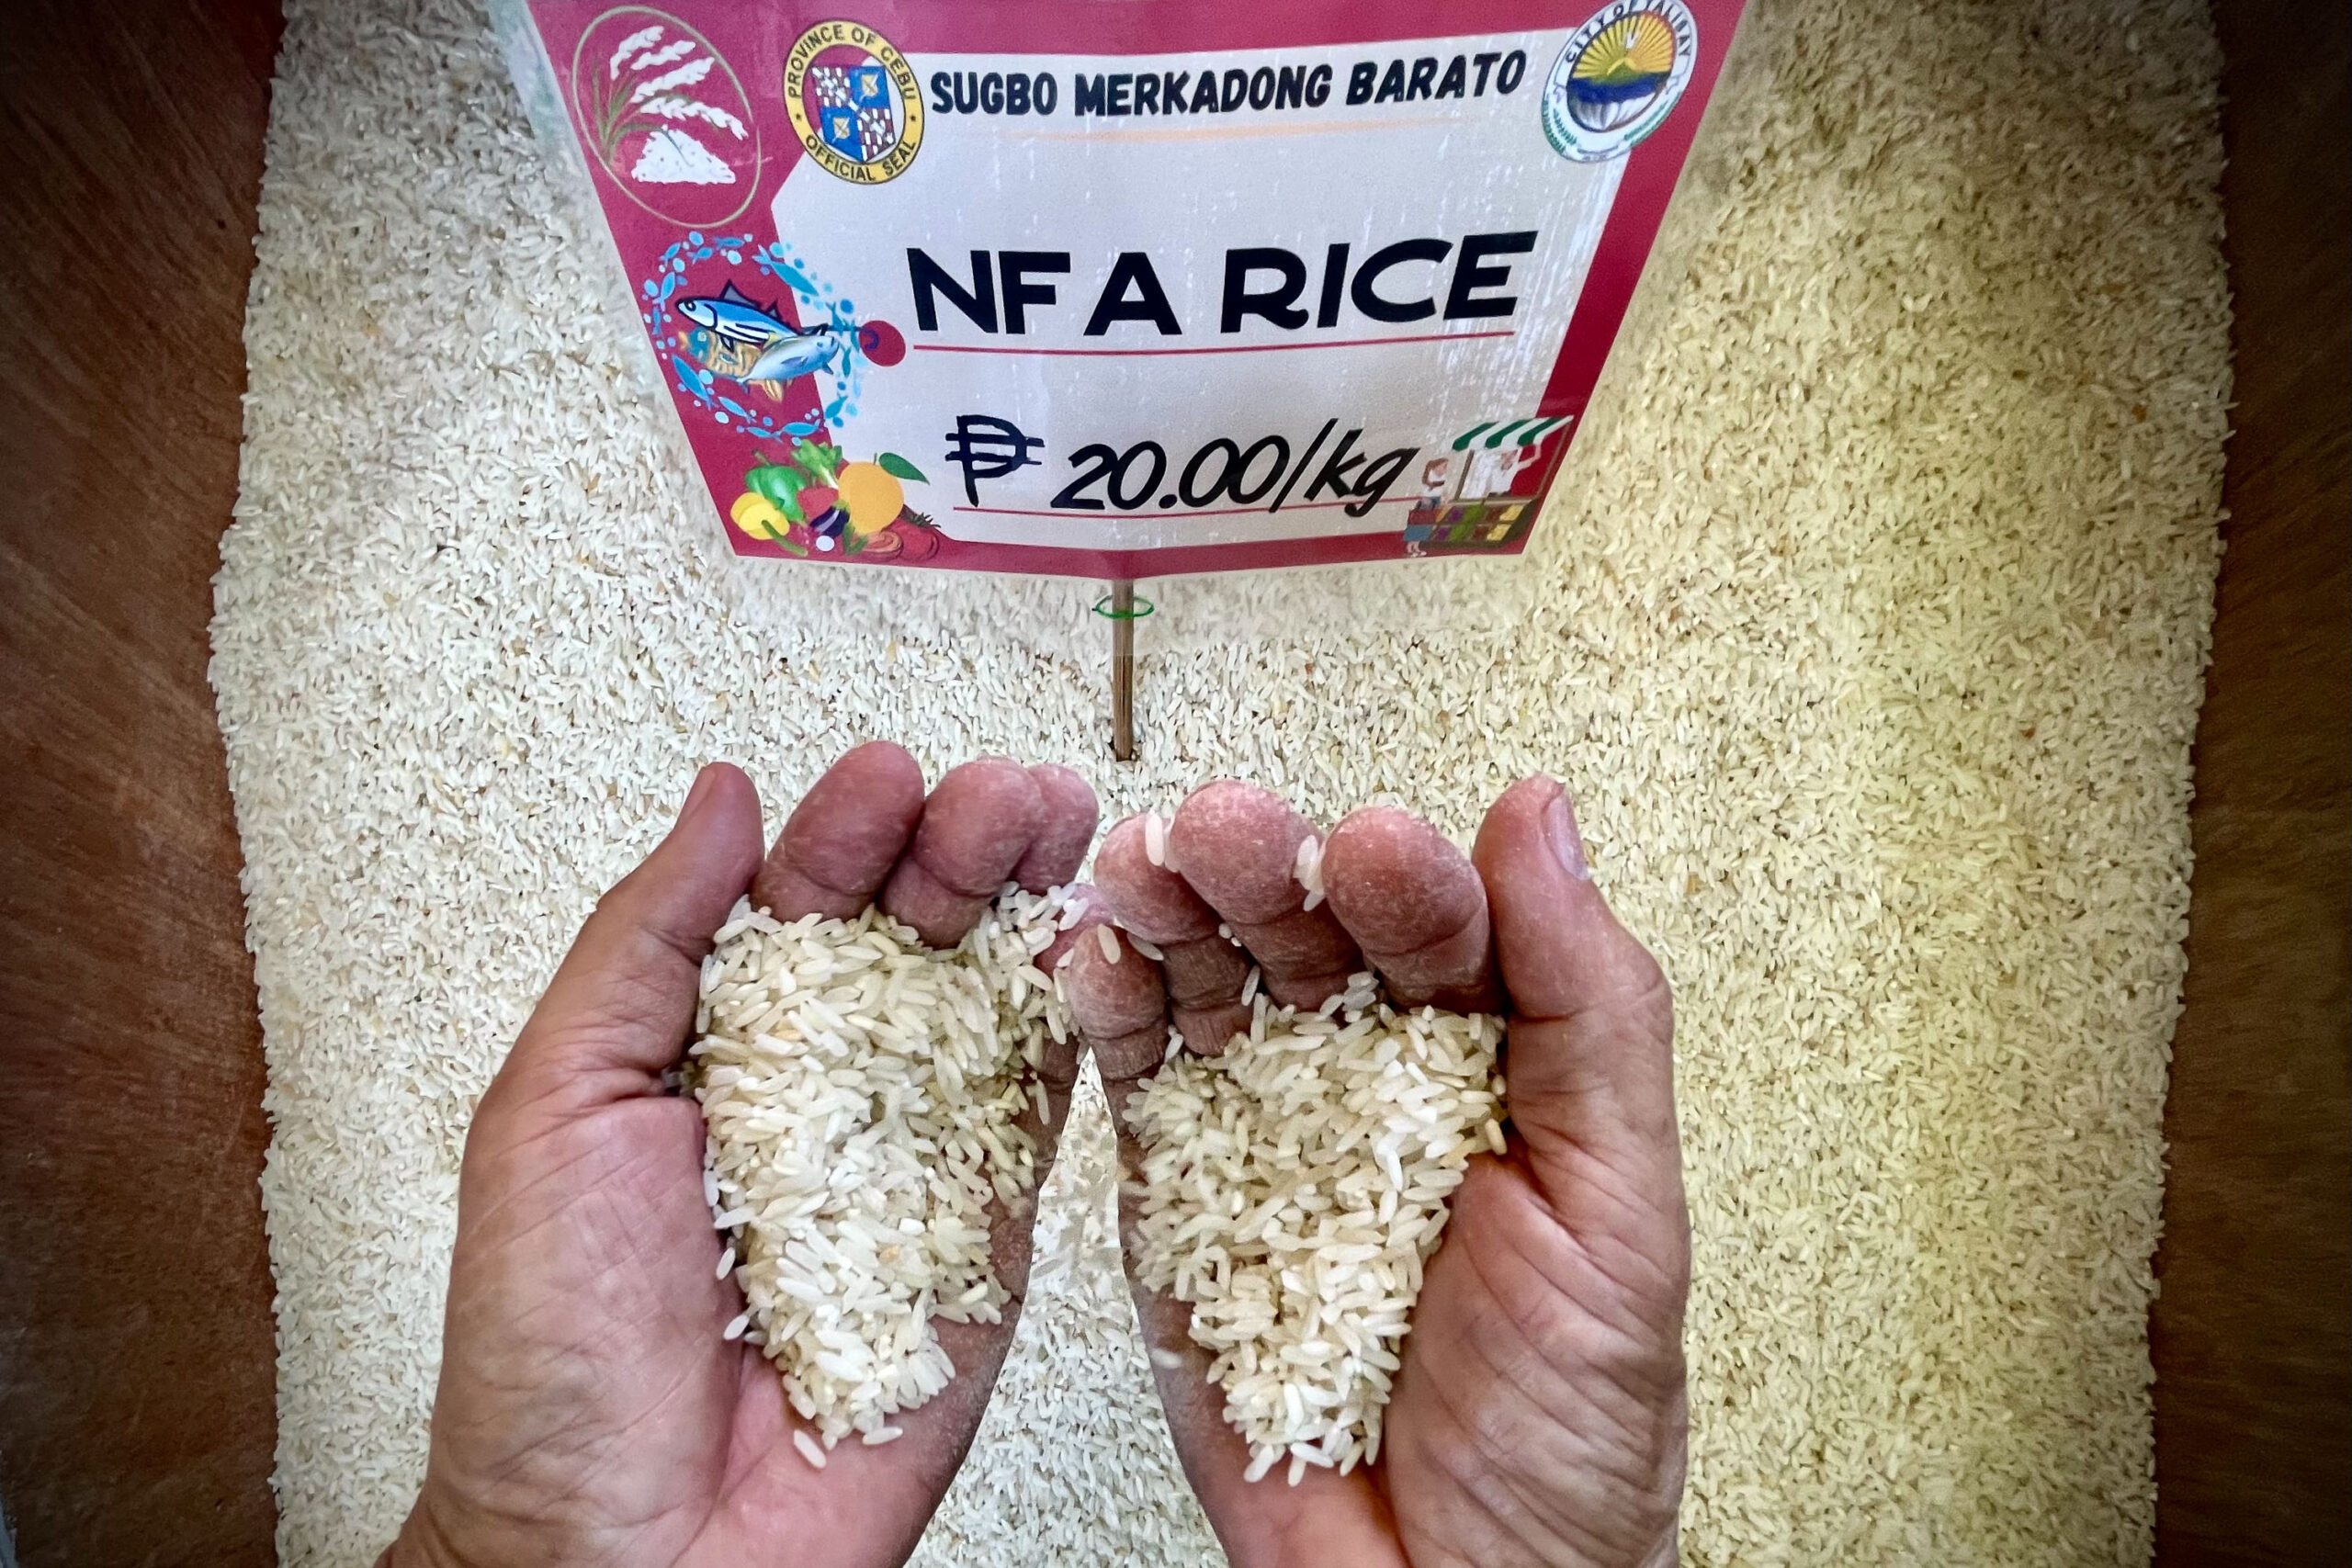 What to expect from changes in rice tariffication law? First, a more powerful NFA.